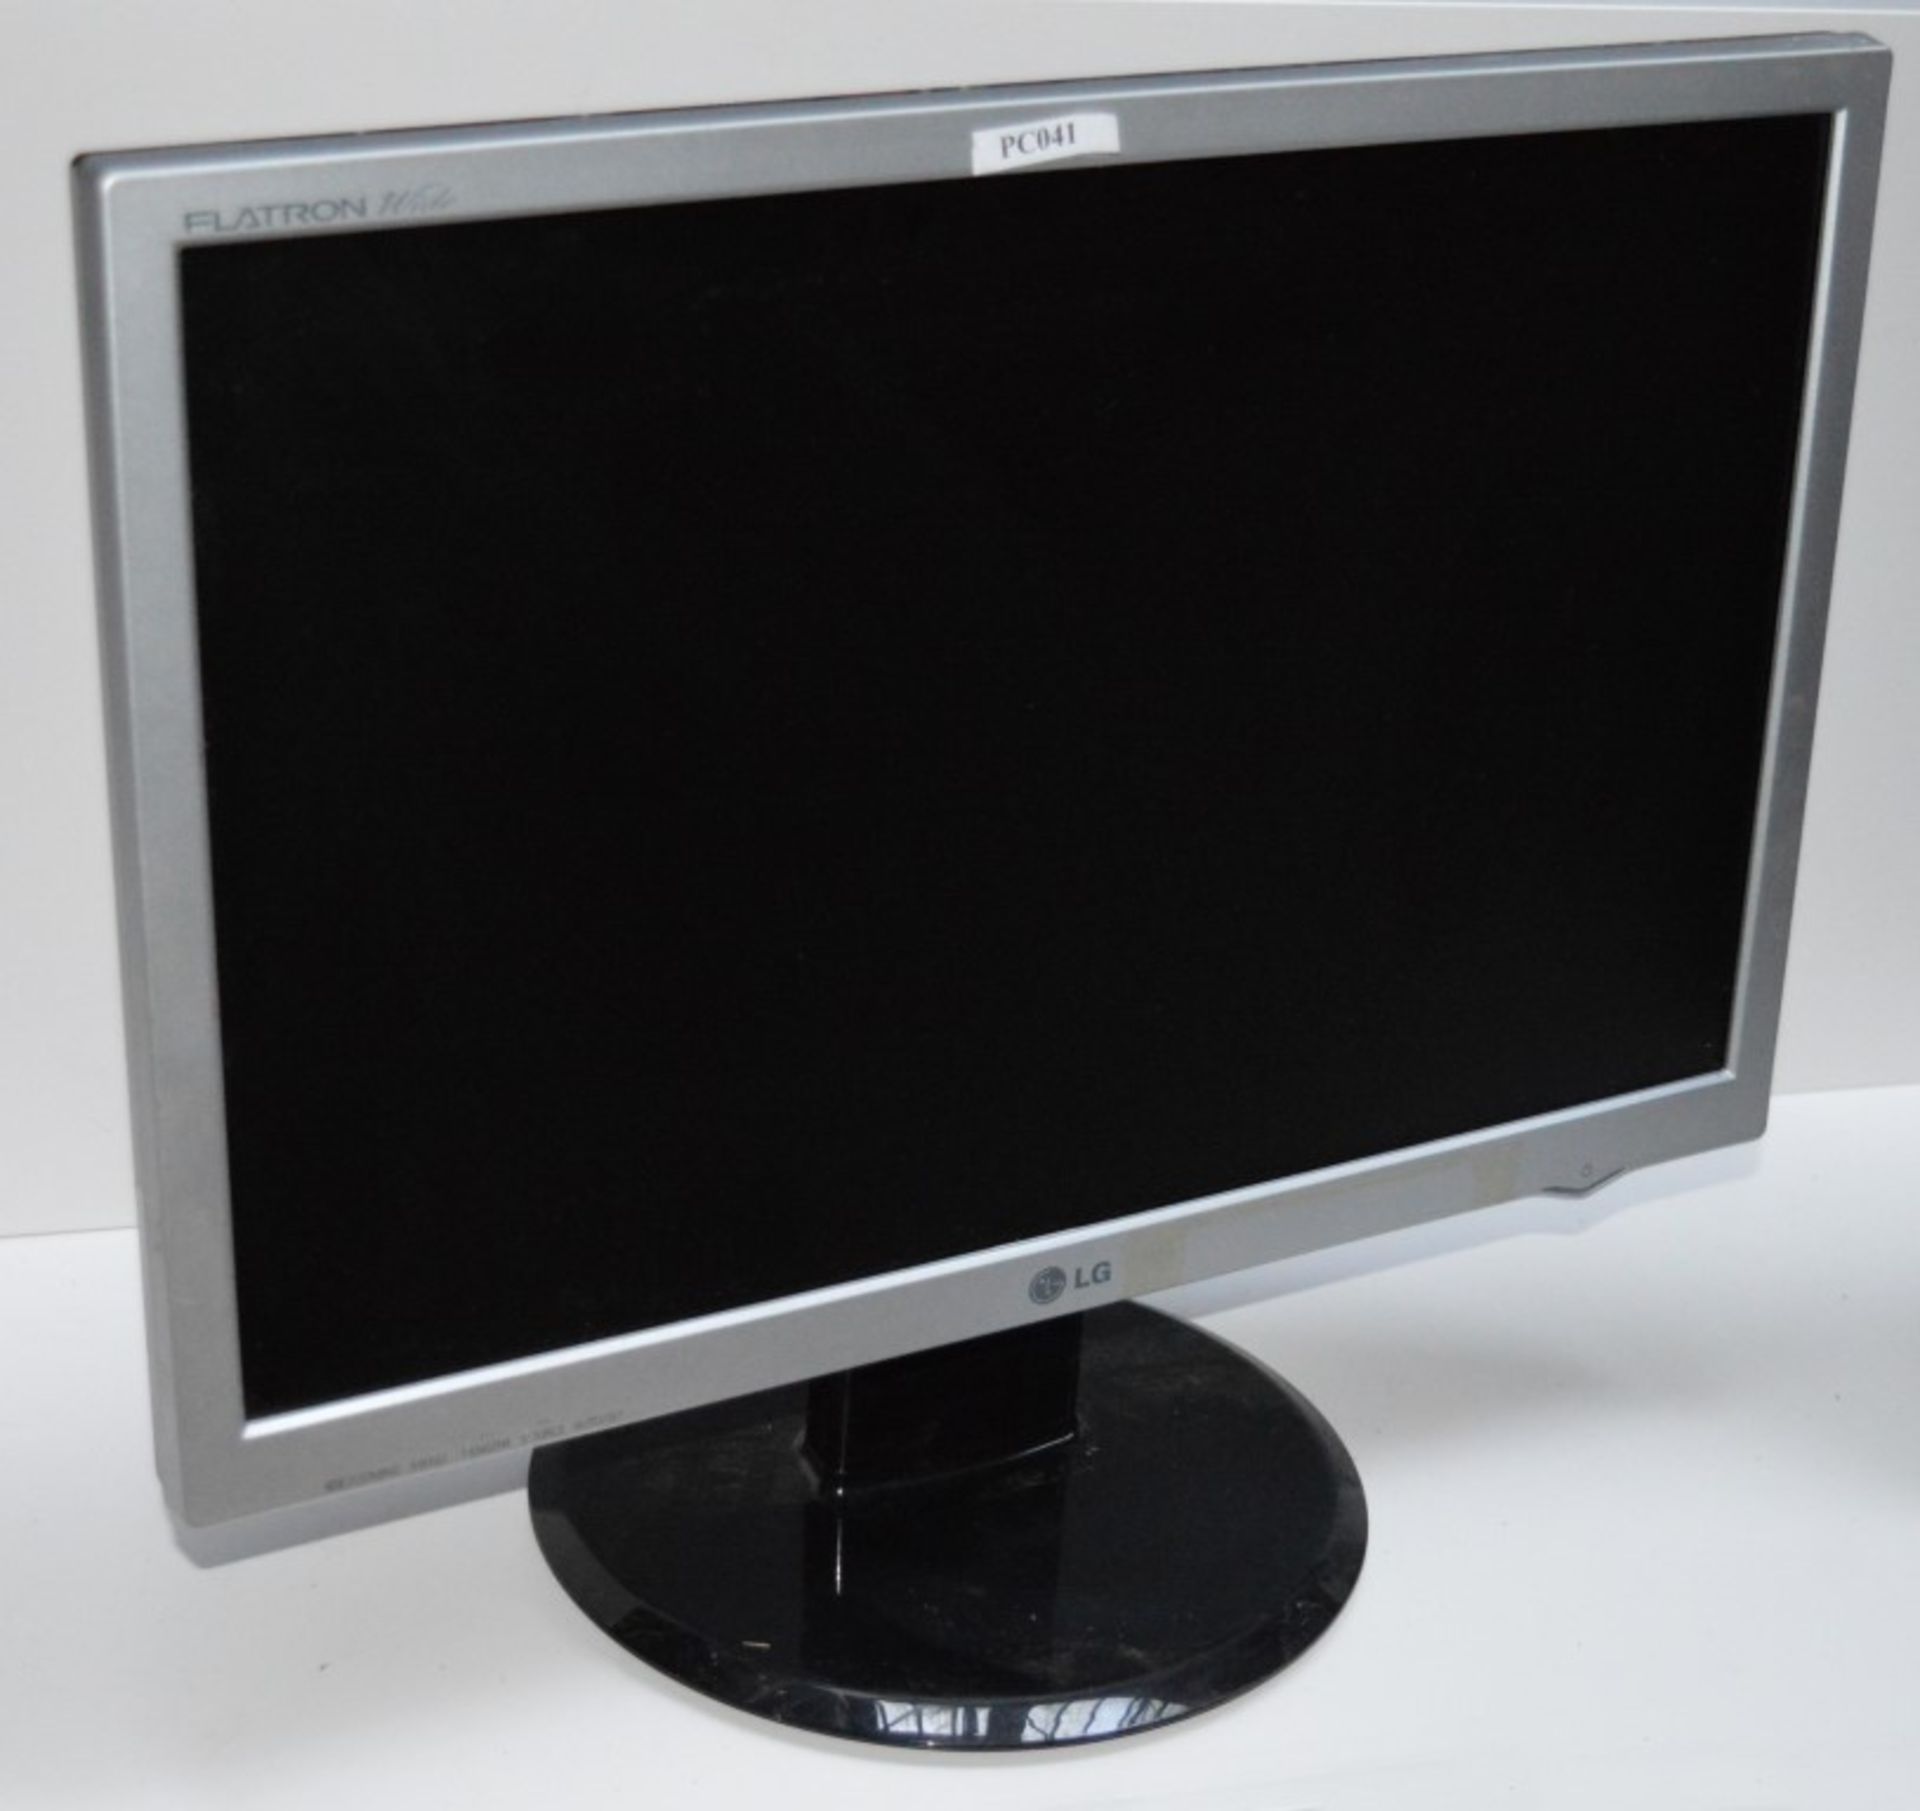 1 x LG Flatron L206WTQ 20 Inch Flat Screen Monitor - Without Cables (Requires Kettle Lead For